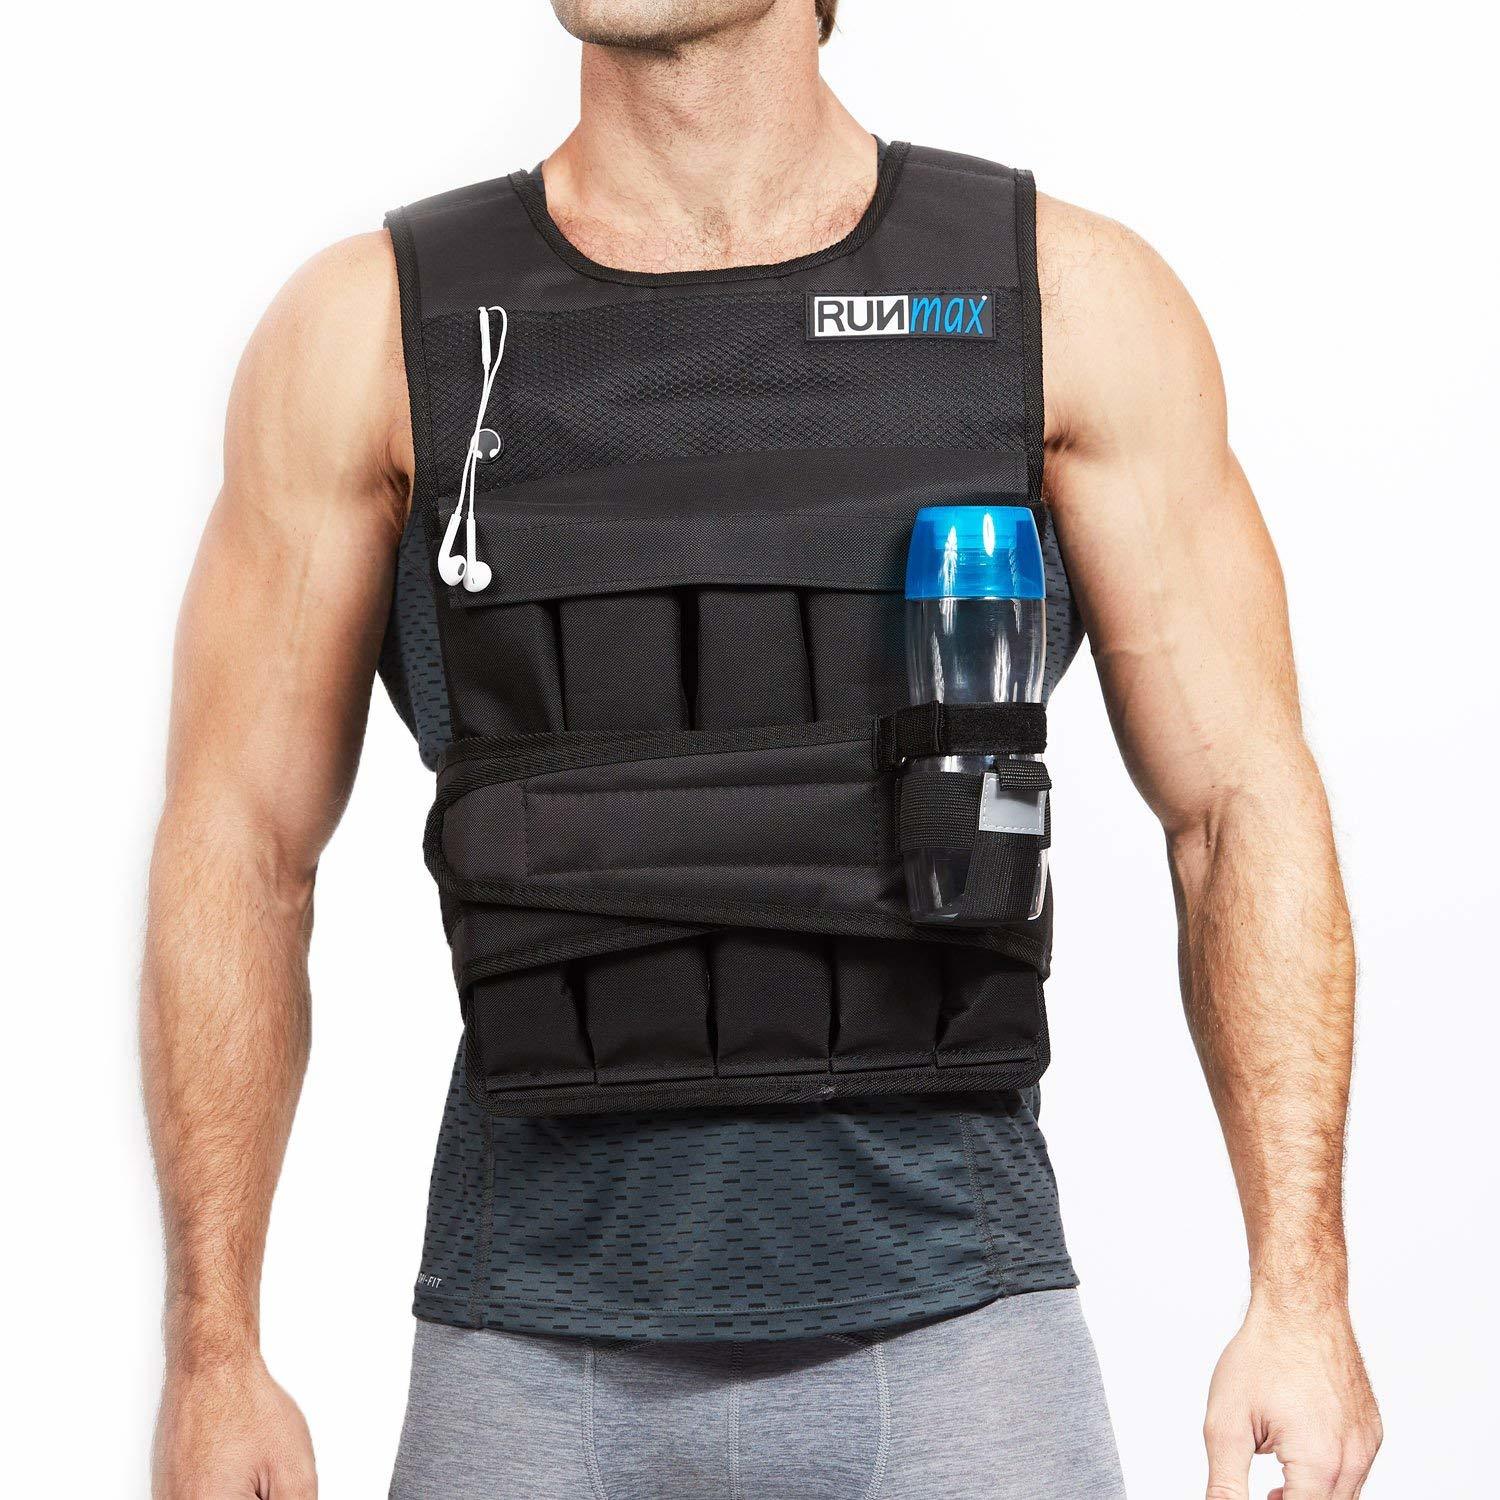 4 best weighted vests for running and crossfit that will change the way U train 1